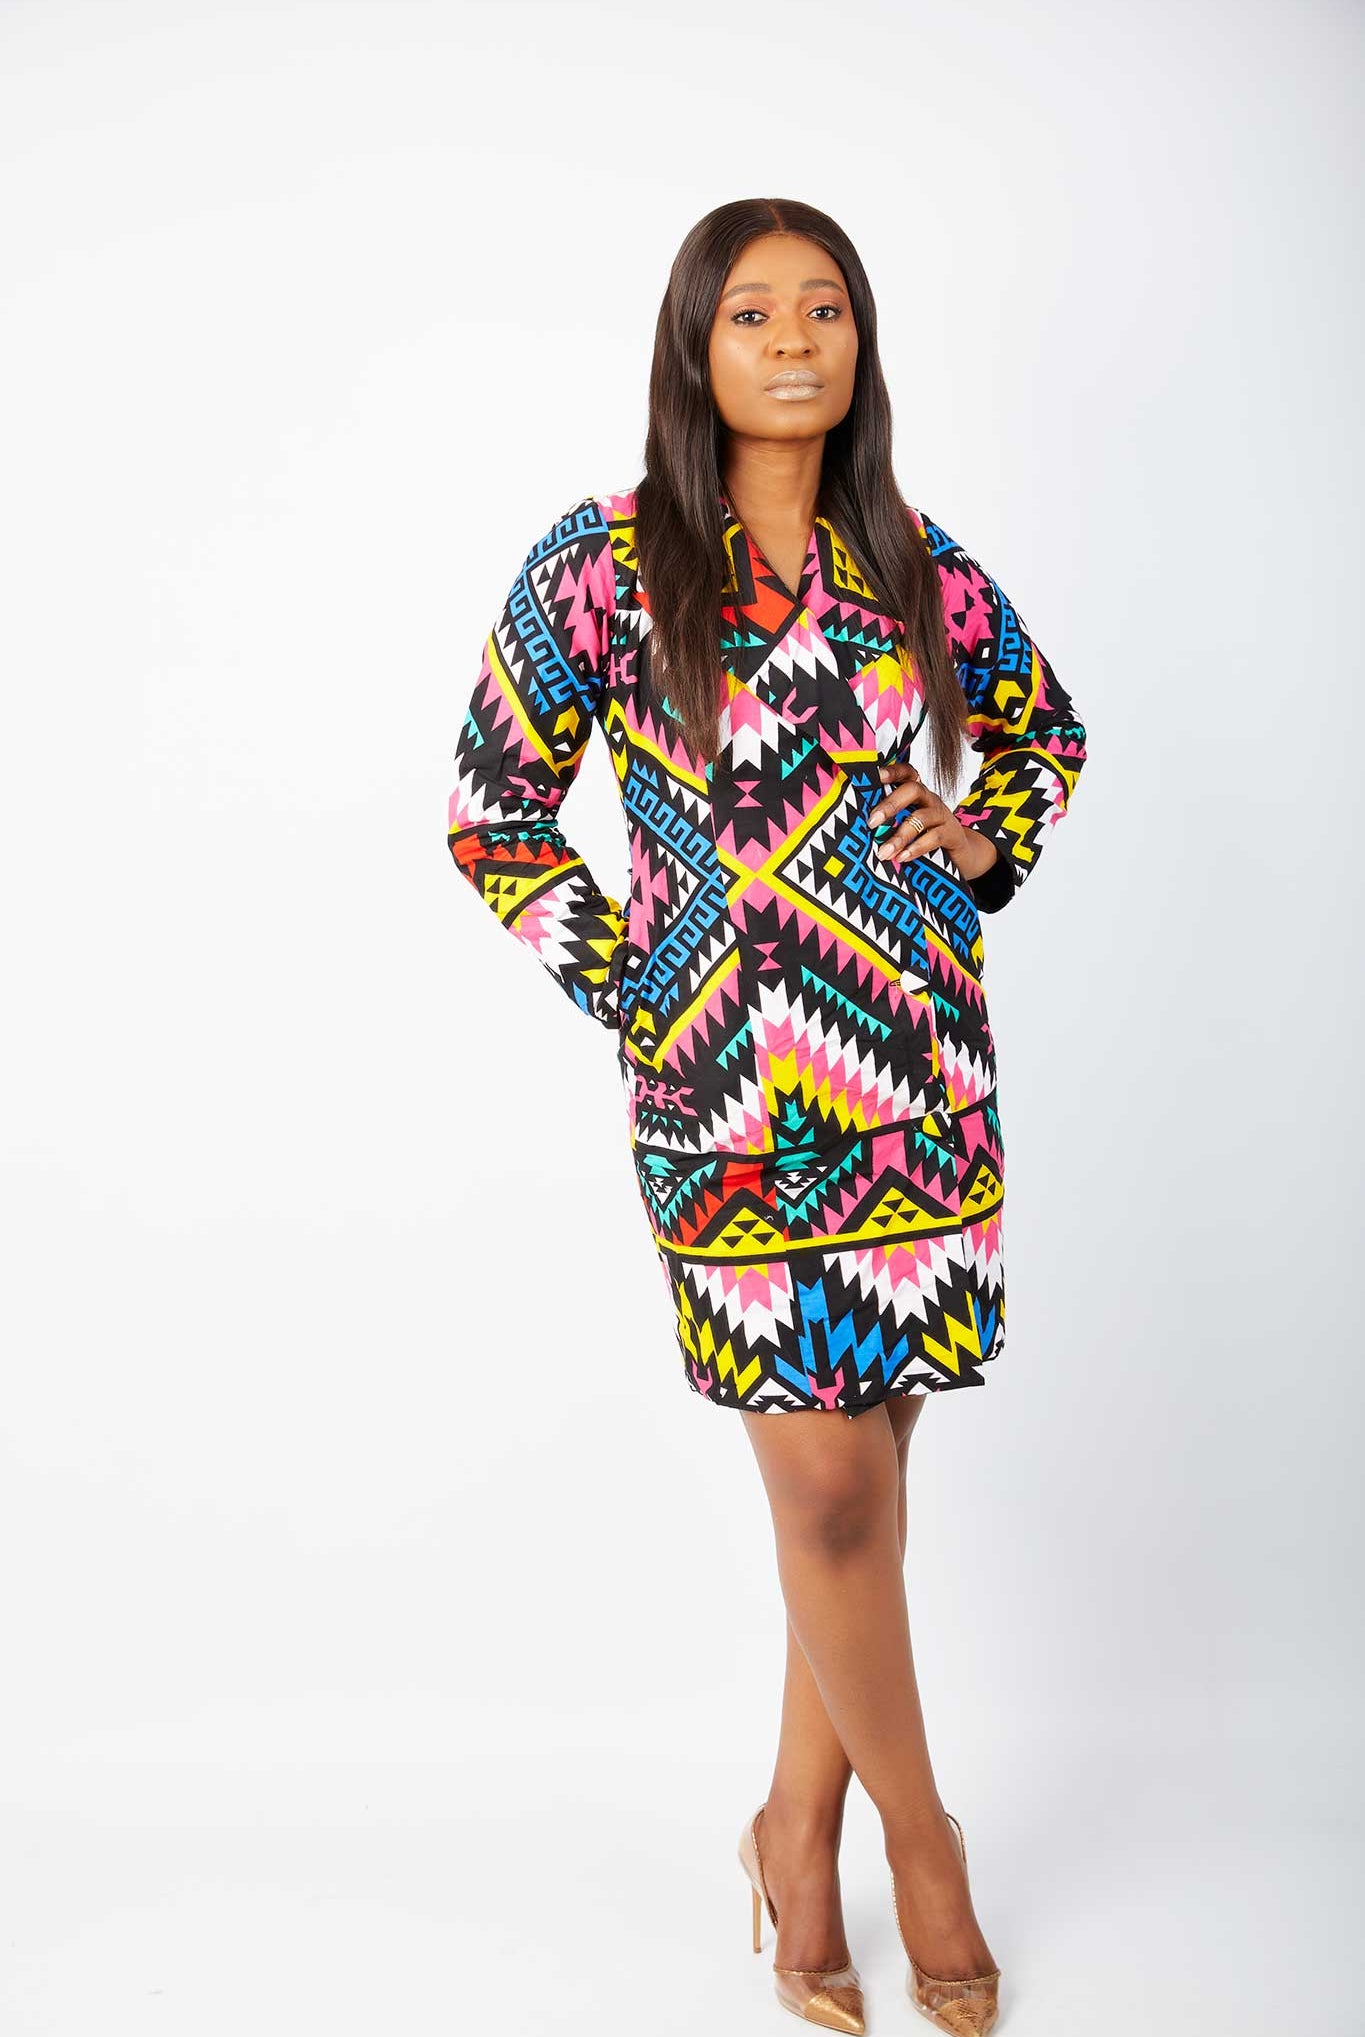  African dress for plus size women | African print clothing in the UK | Ready to wear African print outfits | African dress styles | African clothing | african outfit | kitenge dresses | Africa Dresses for Women | Ankara Styles for ladies | African dresses for work | Danshiki Dress | Ghana African dress | Kente Dress | African dress | African print Dress | African Clothing Online Shop | Short African dress | Mini African dress UK | African dress UK